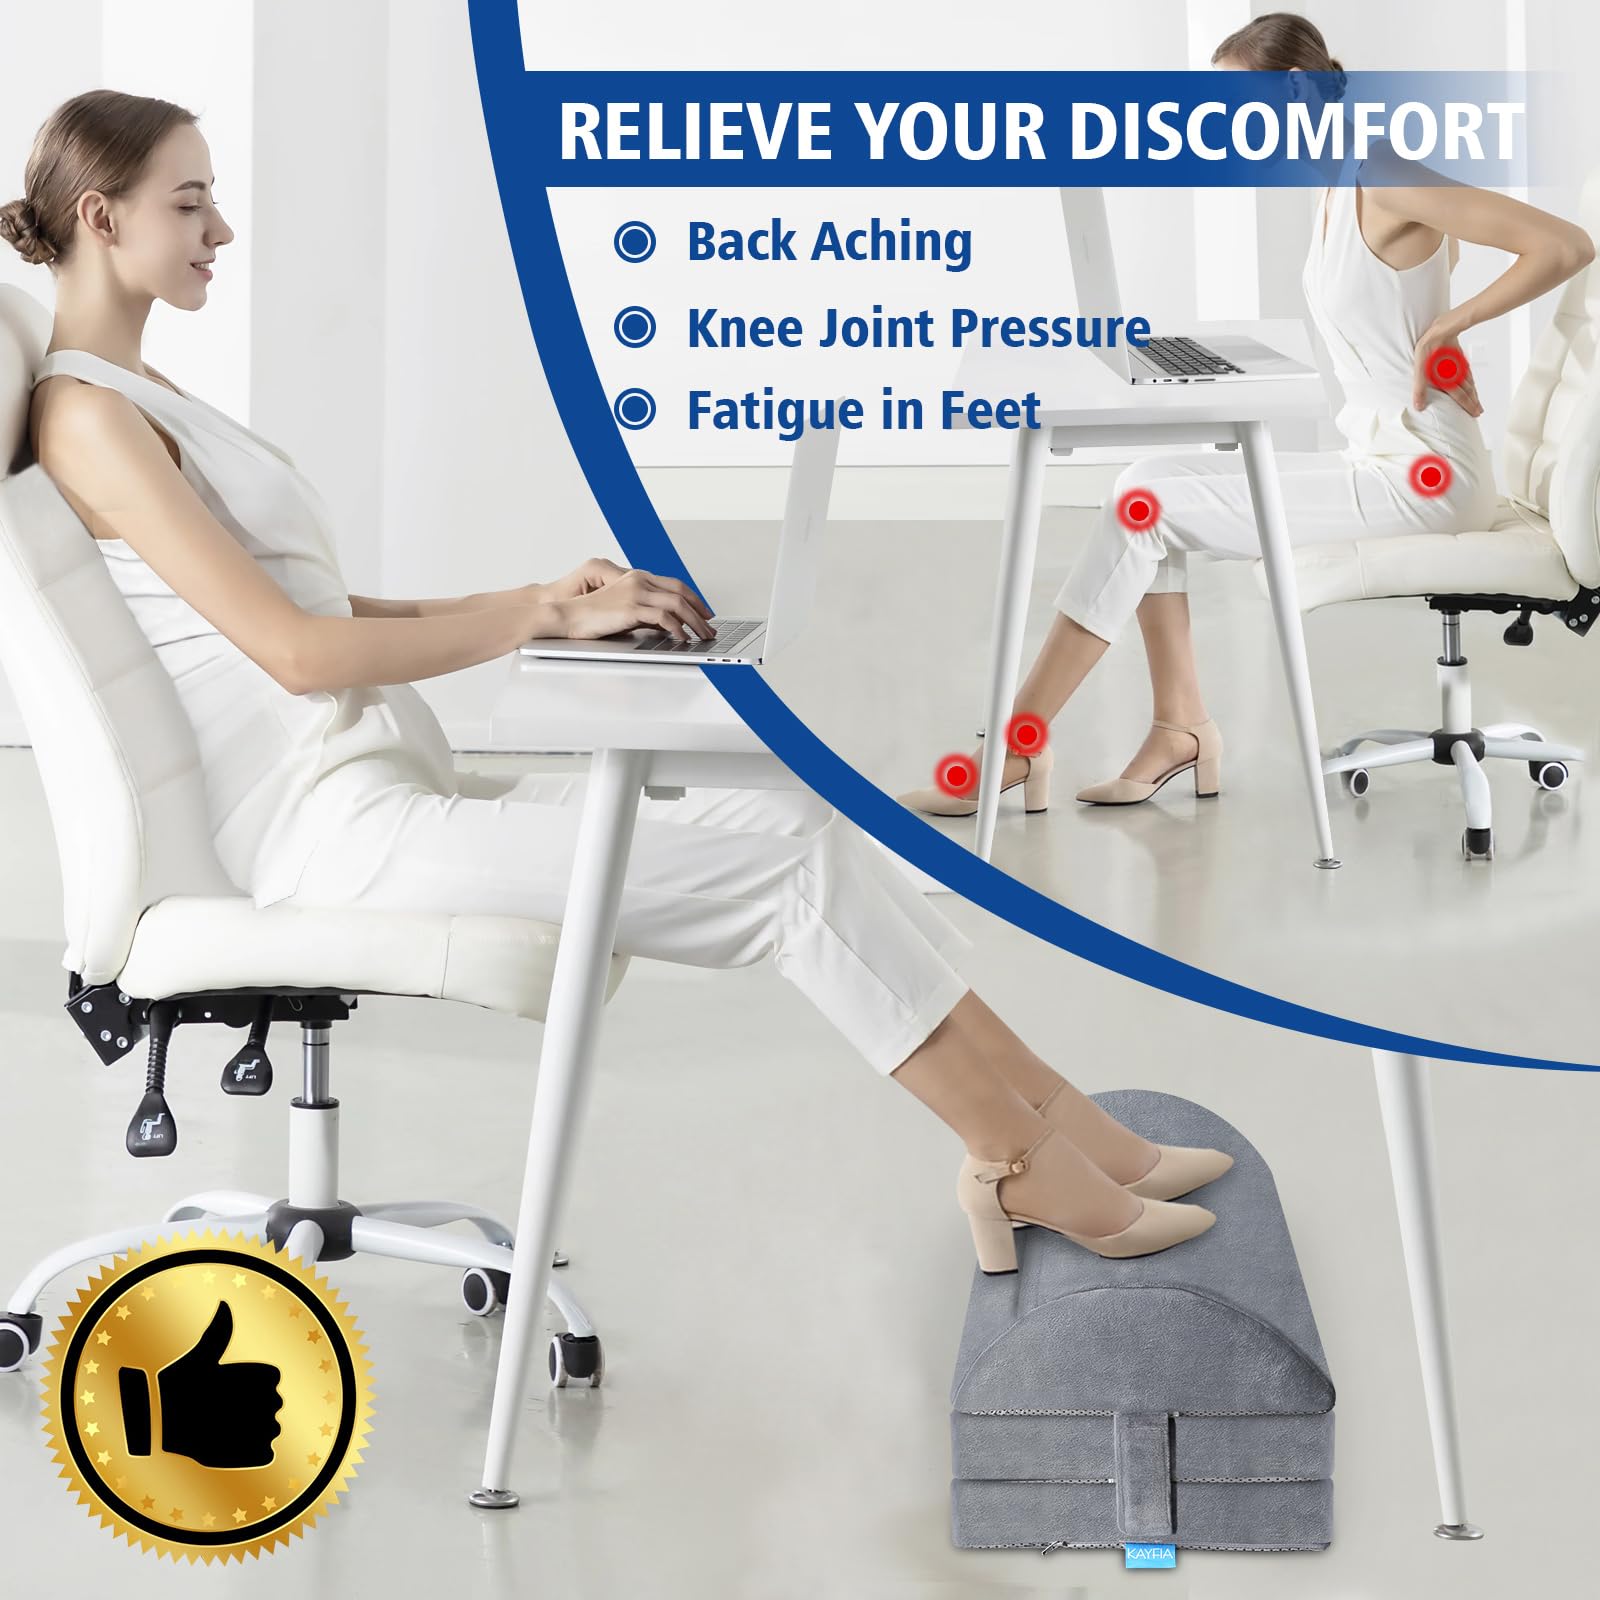 KAYFIA Foot Rest for Under Desk at Work XX-Large with 3 Adjustable Heights，Foot Stool with Supportive Gel-Infused Foam, Warmer Feet Pocket Footrest for Office Gaming Chair, for Leg Support -Gray